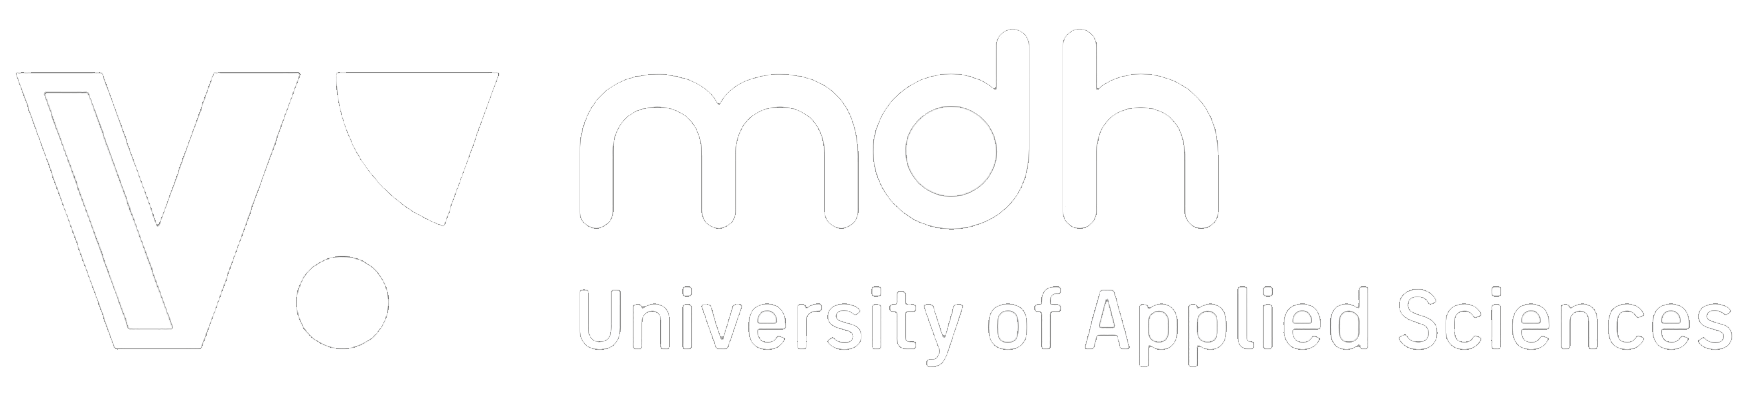 mdh University of Applied Sciences